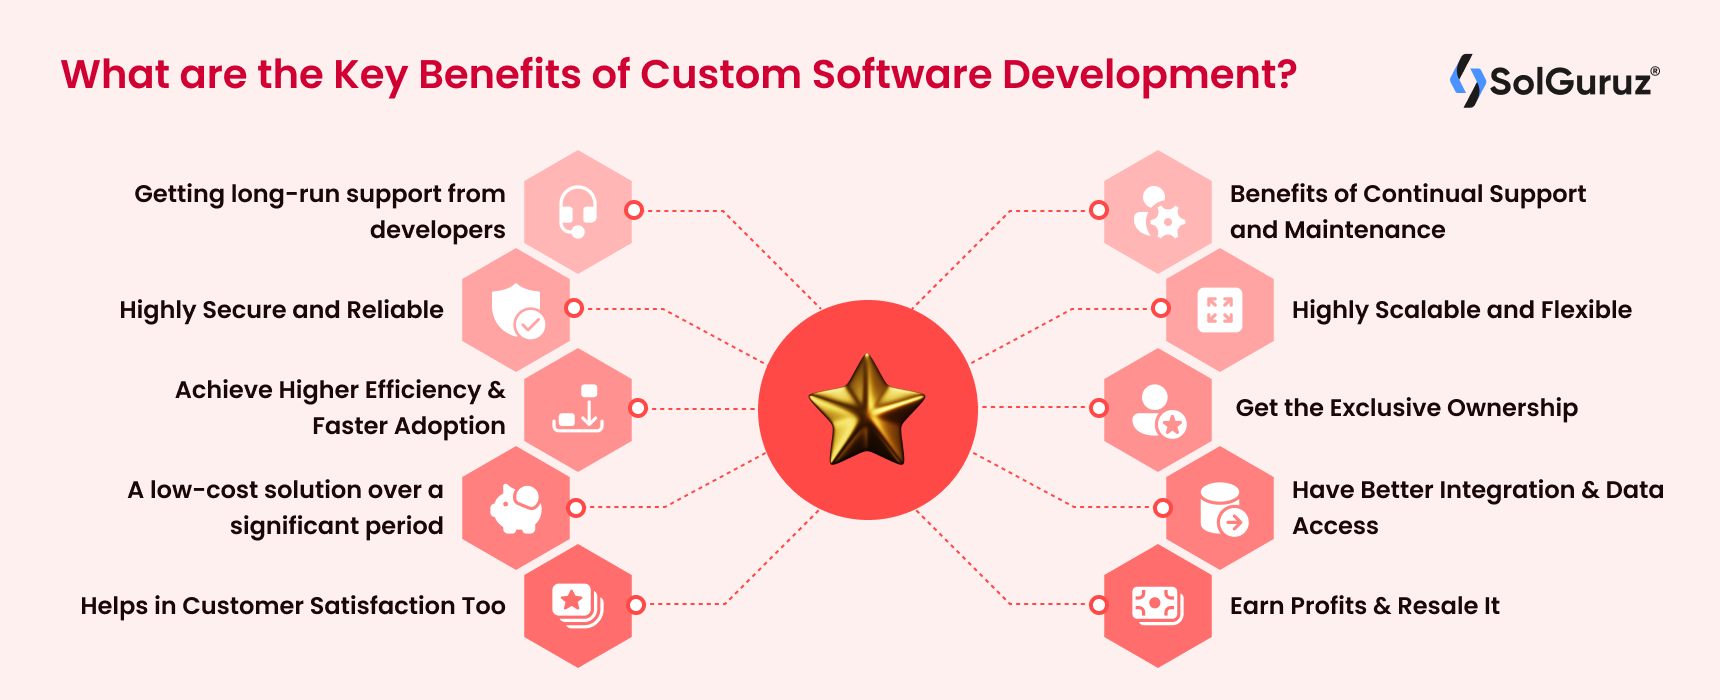 What are the Key Benefits of Custom Software Development